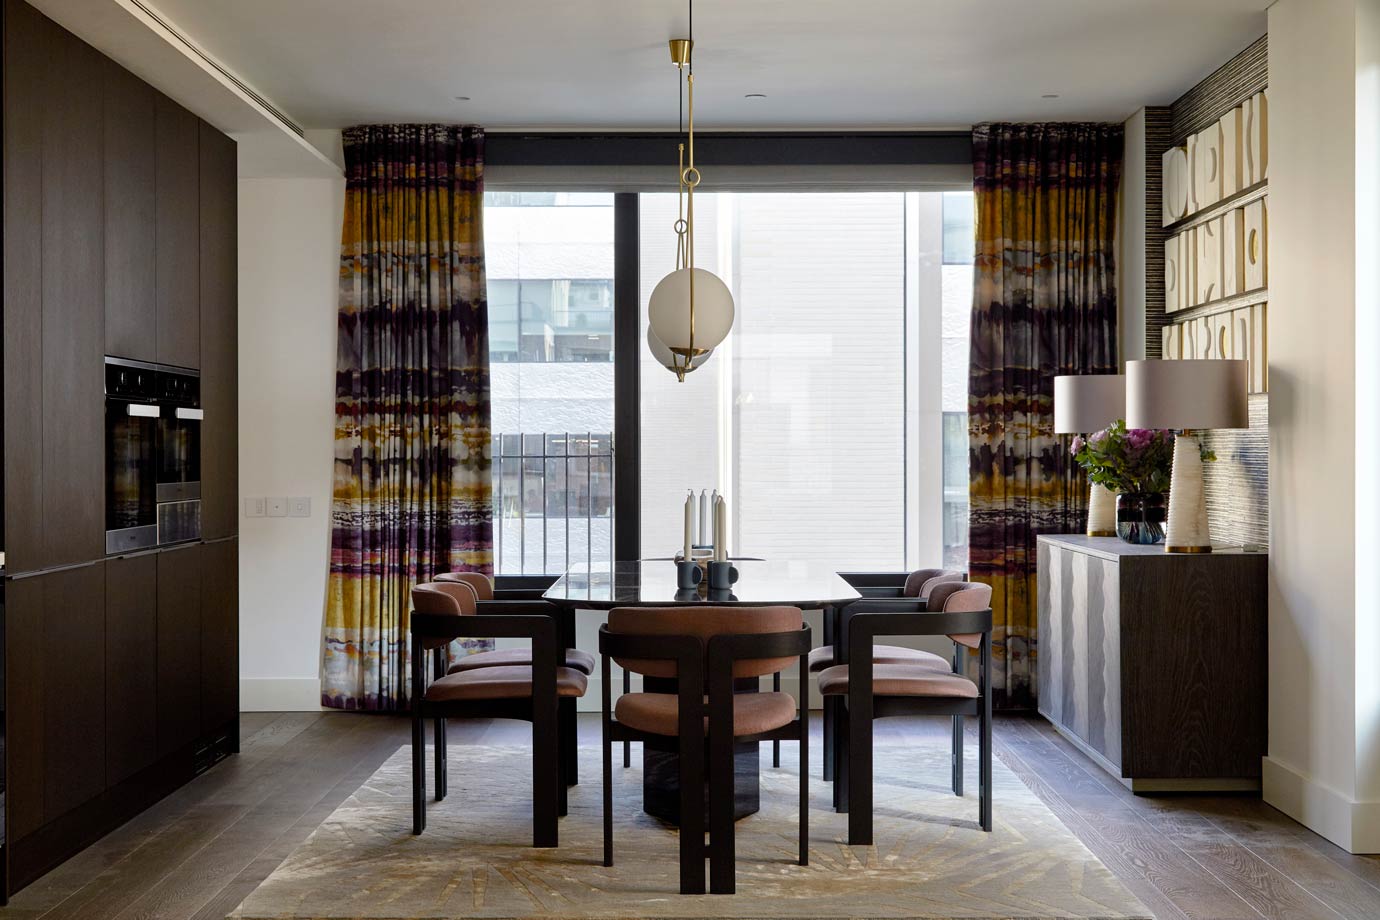 Eye level lighting in our Fitzrovia project with a beautiful pendant lamp.